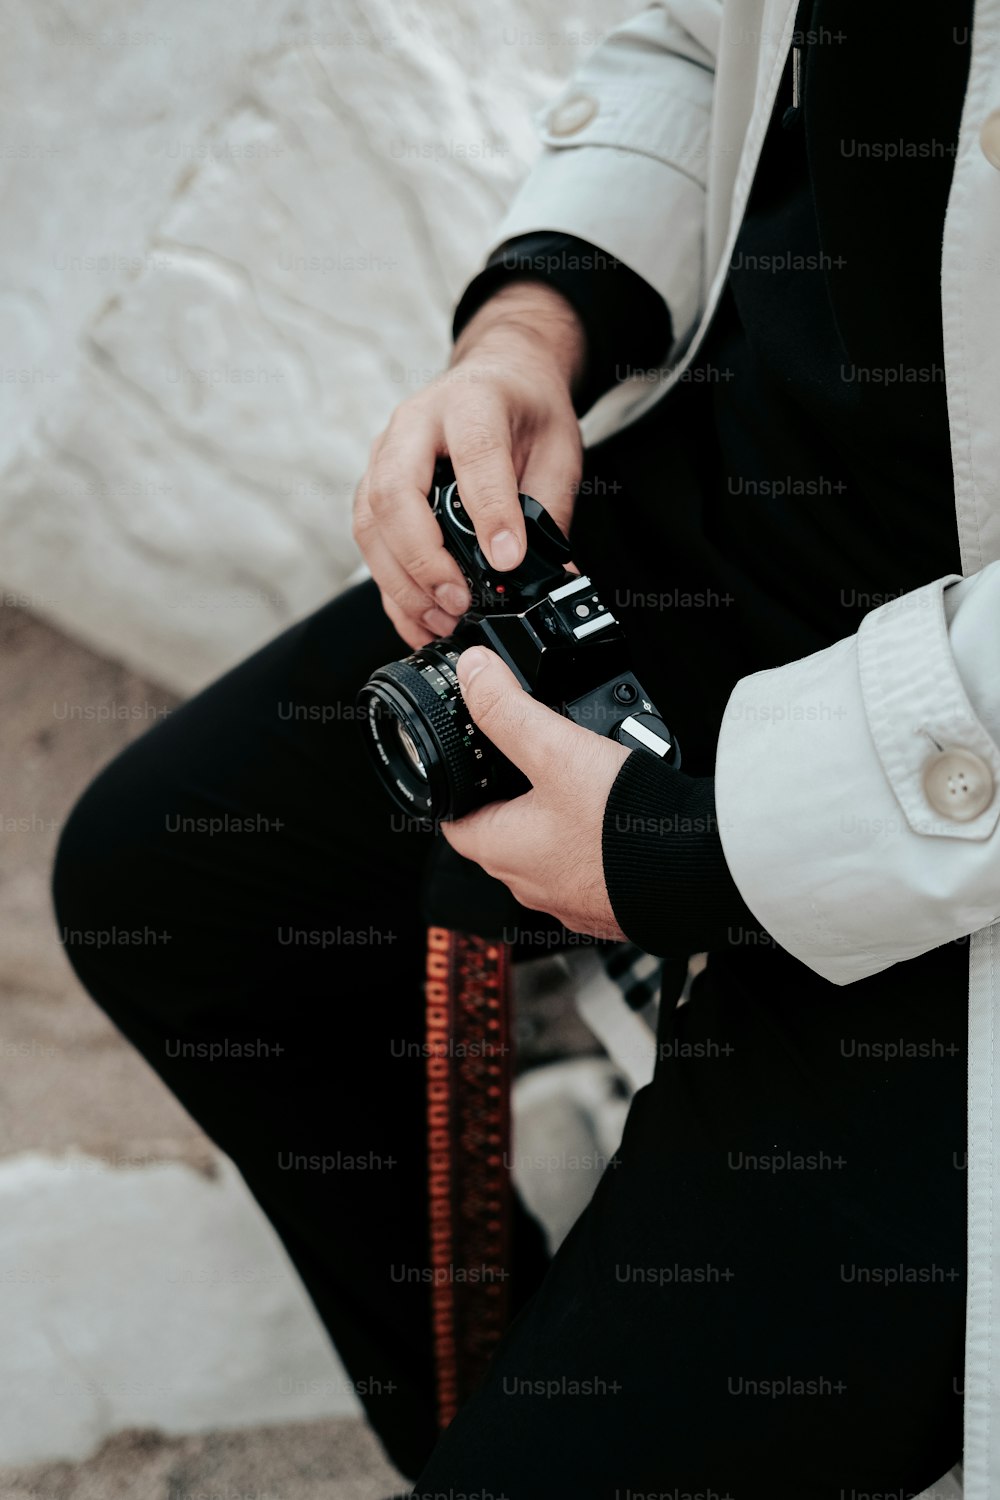 Hand Embroidered Camera Strap & Bag Strap - Camil Collection